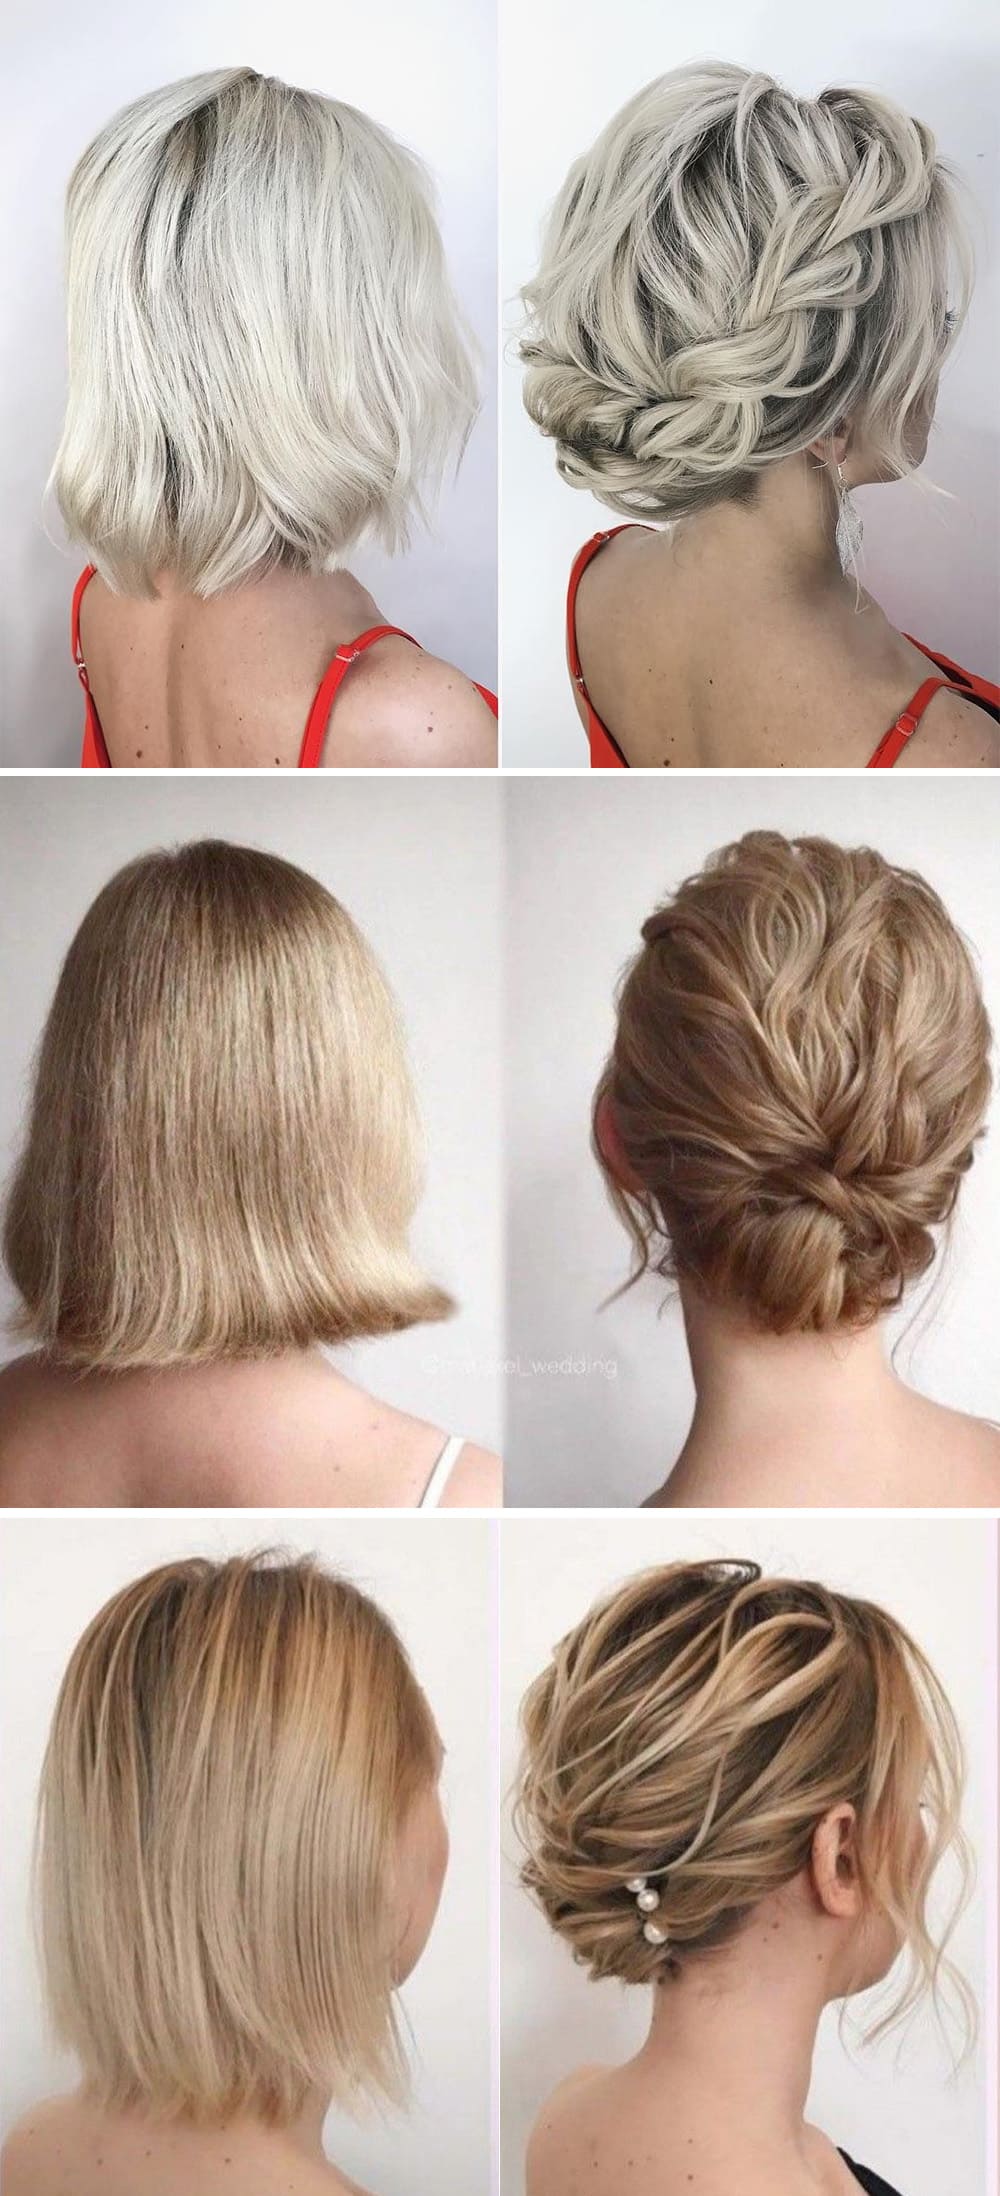 35 Easy Hairstyles for Weddings That Are Totally Stunning